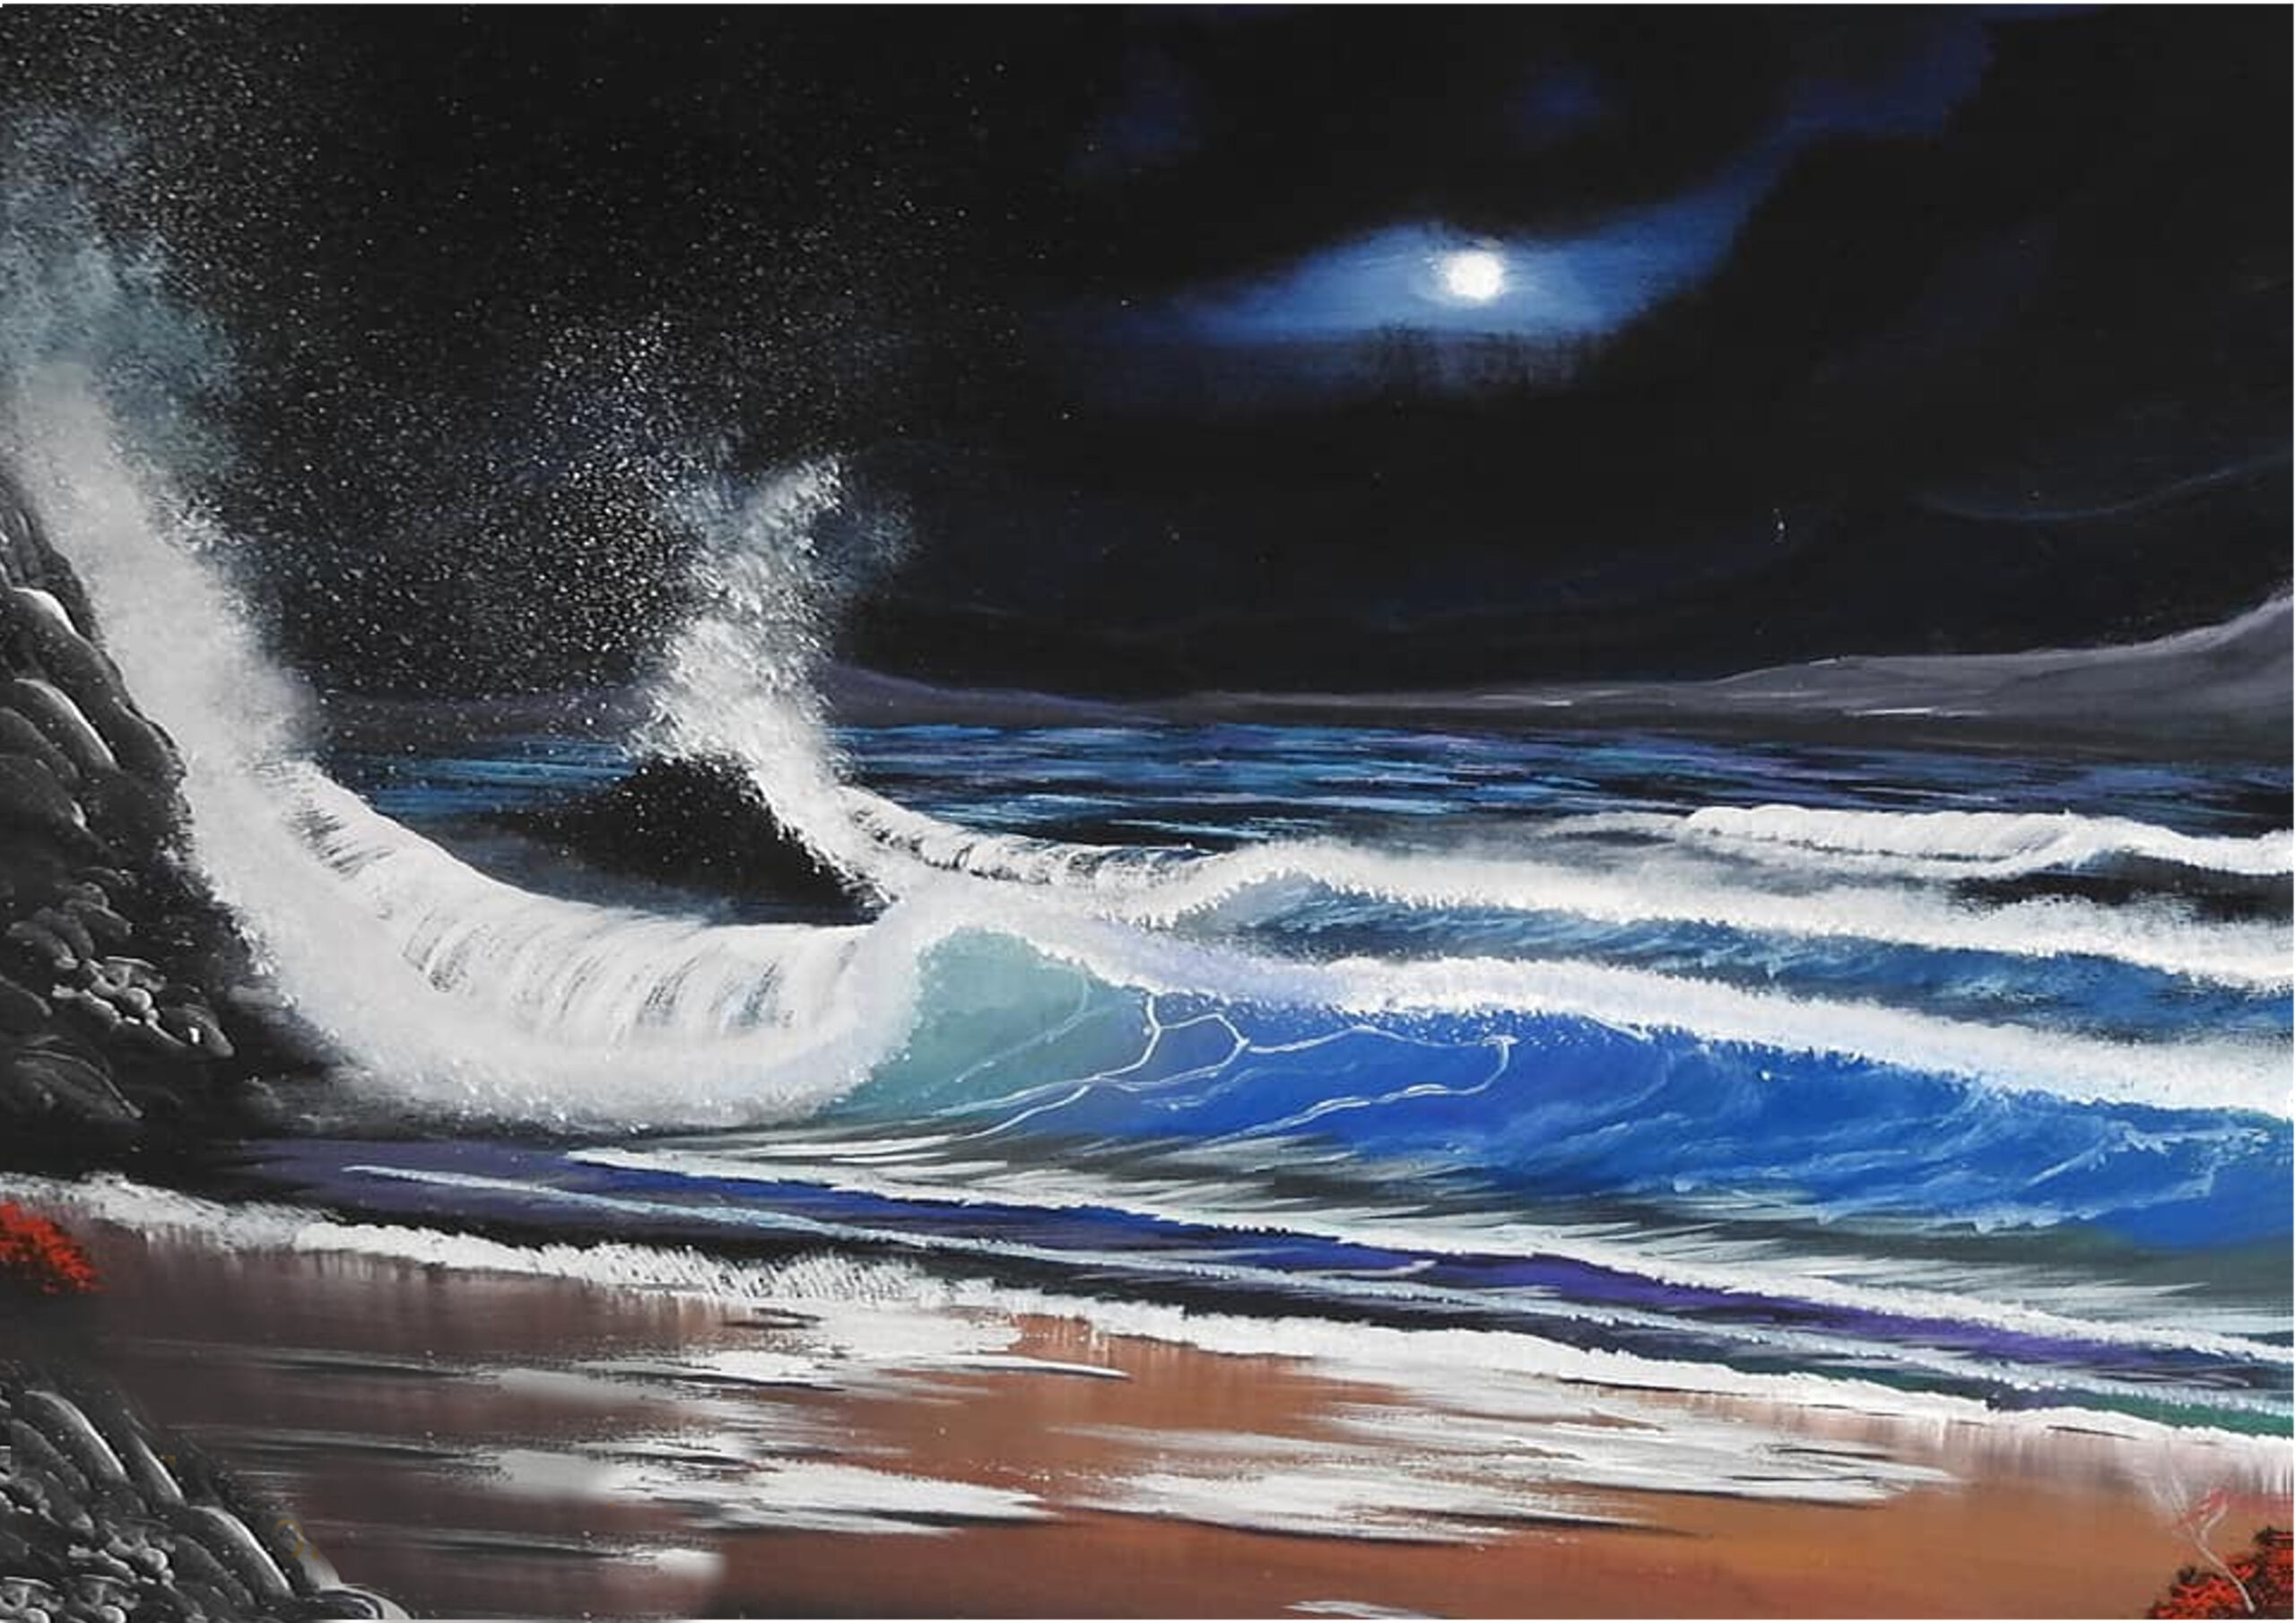 Night wave – Seascape painting